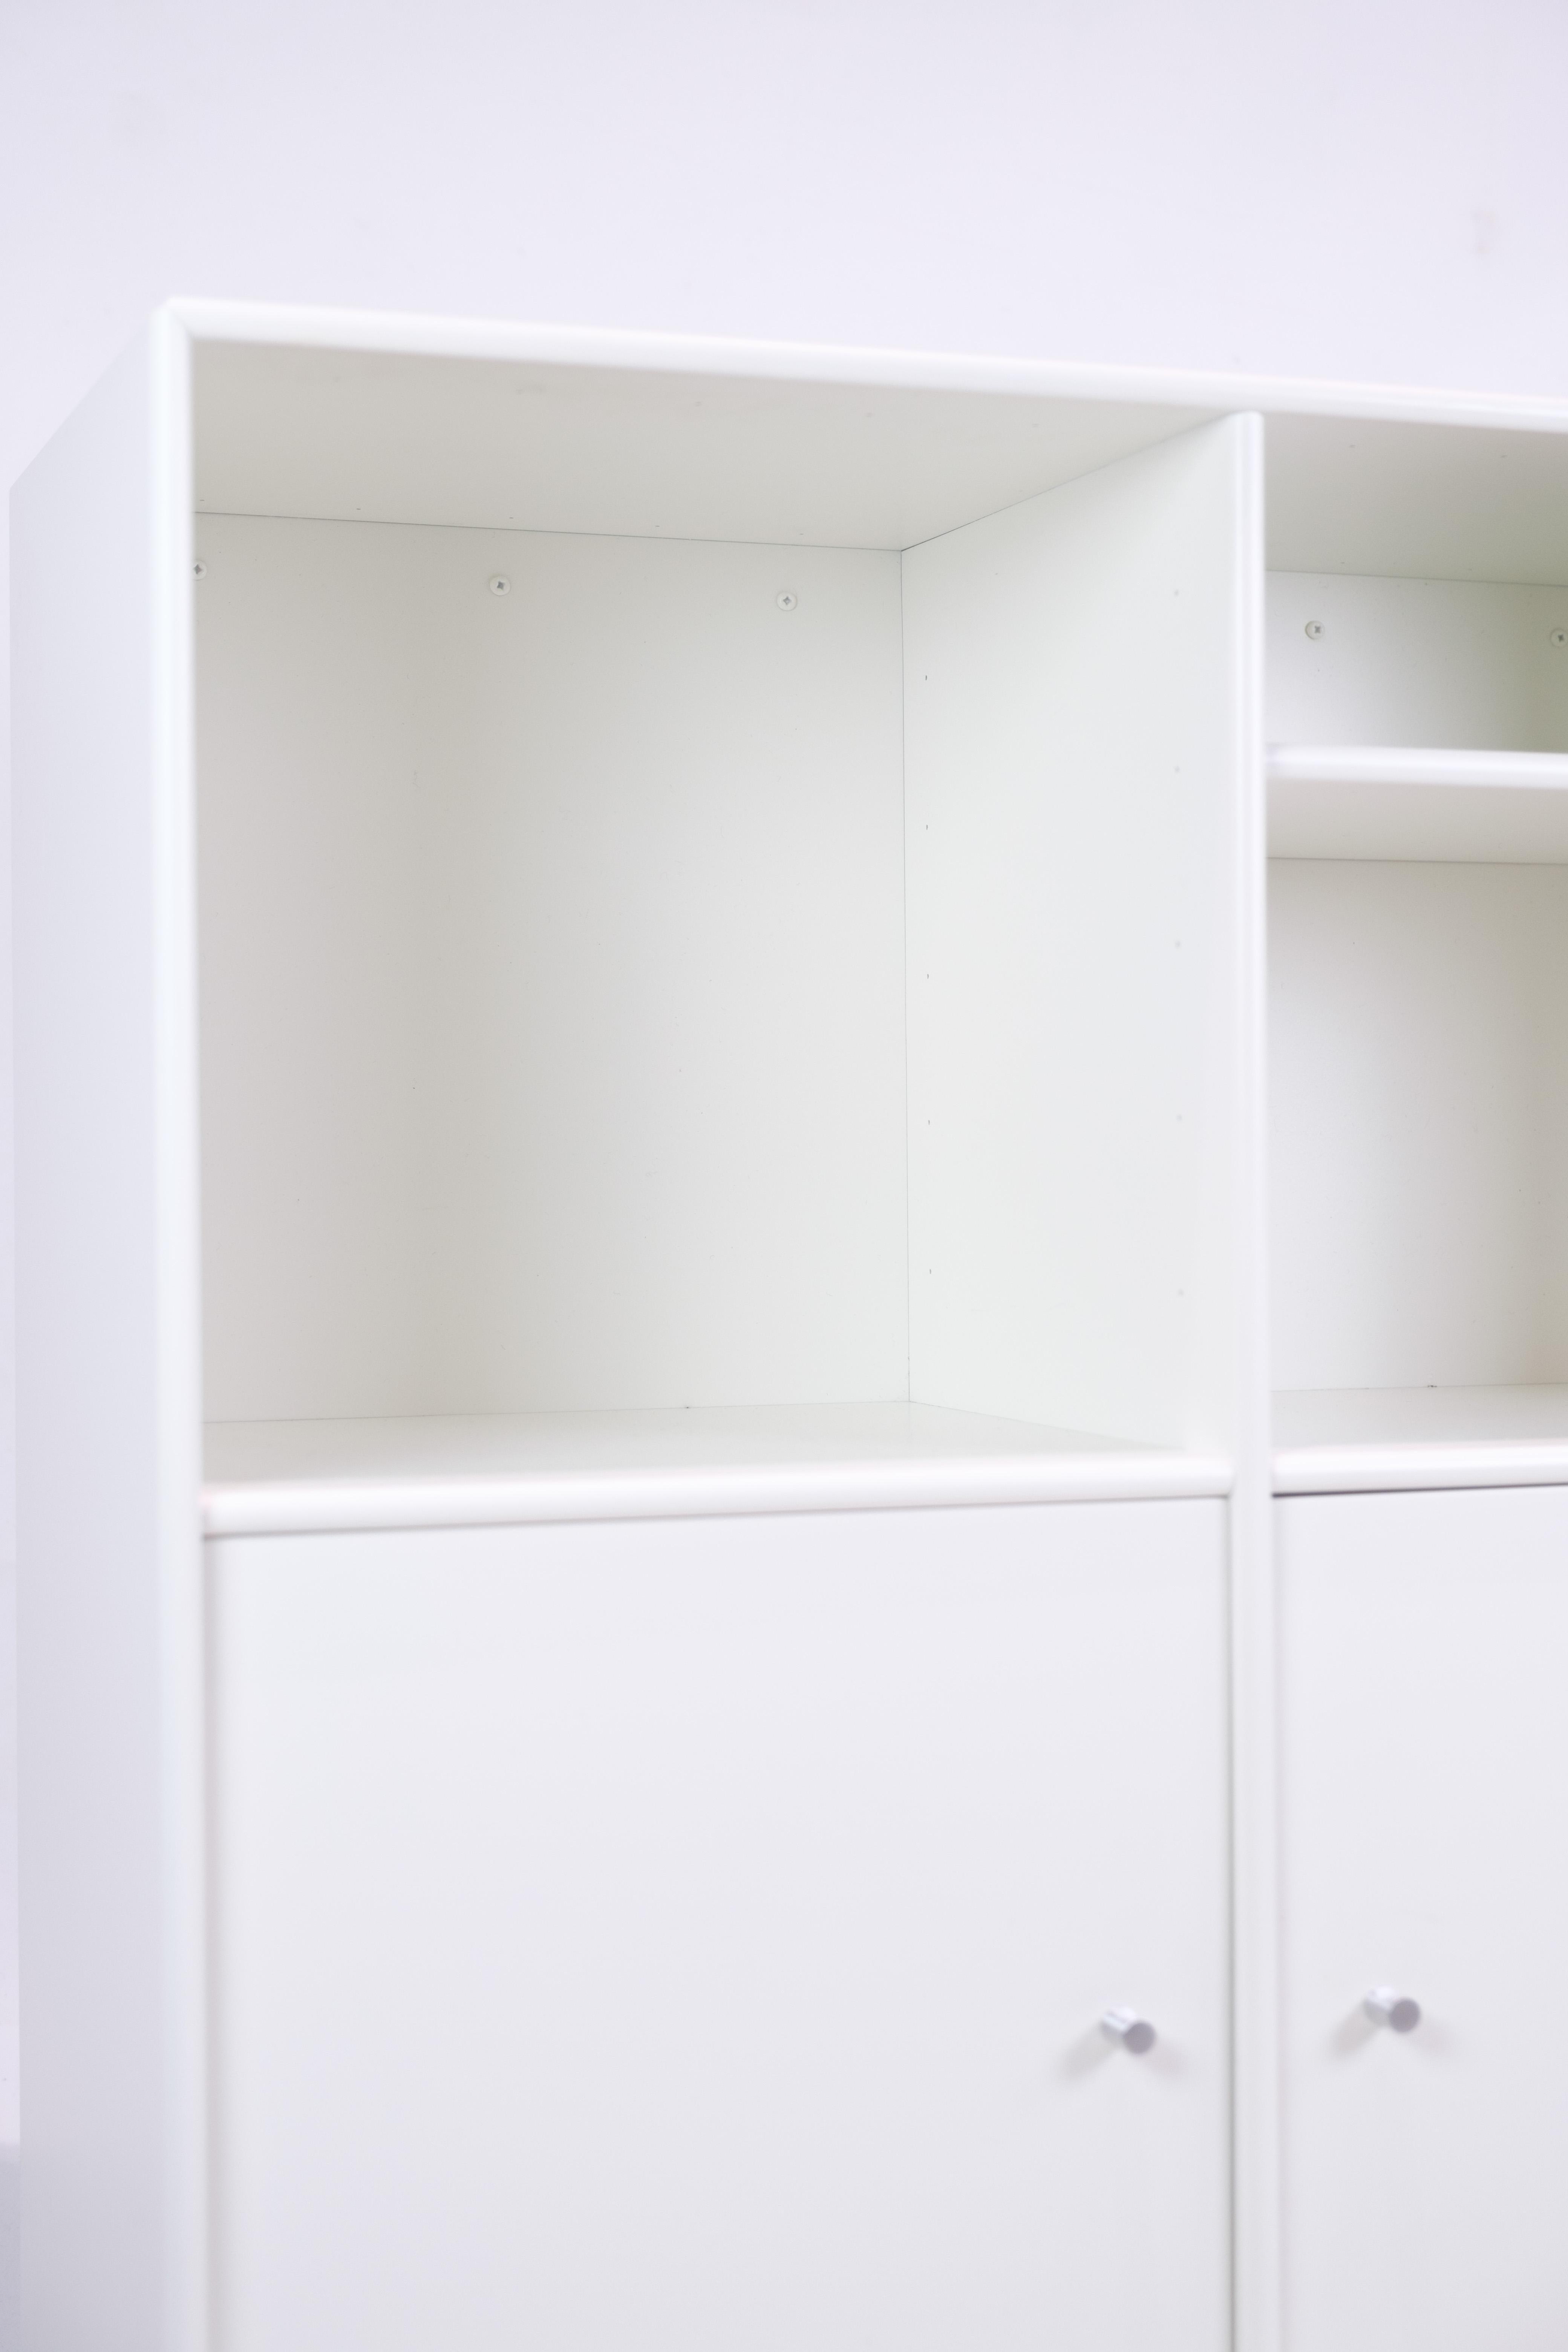 The Montana bookcase, model 1520, is an example of a timeless and functional storage solution designed by Peter J. Lassen. This white bookcase combines simplicity and elegance with practicality.

With two open shelves at the top and two lower